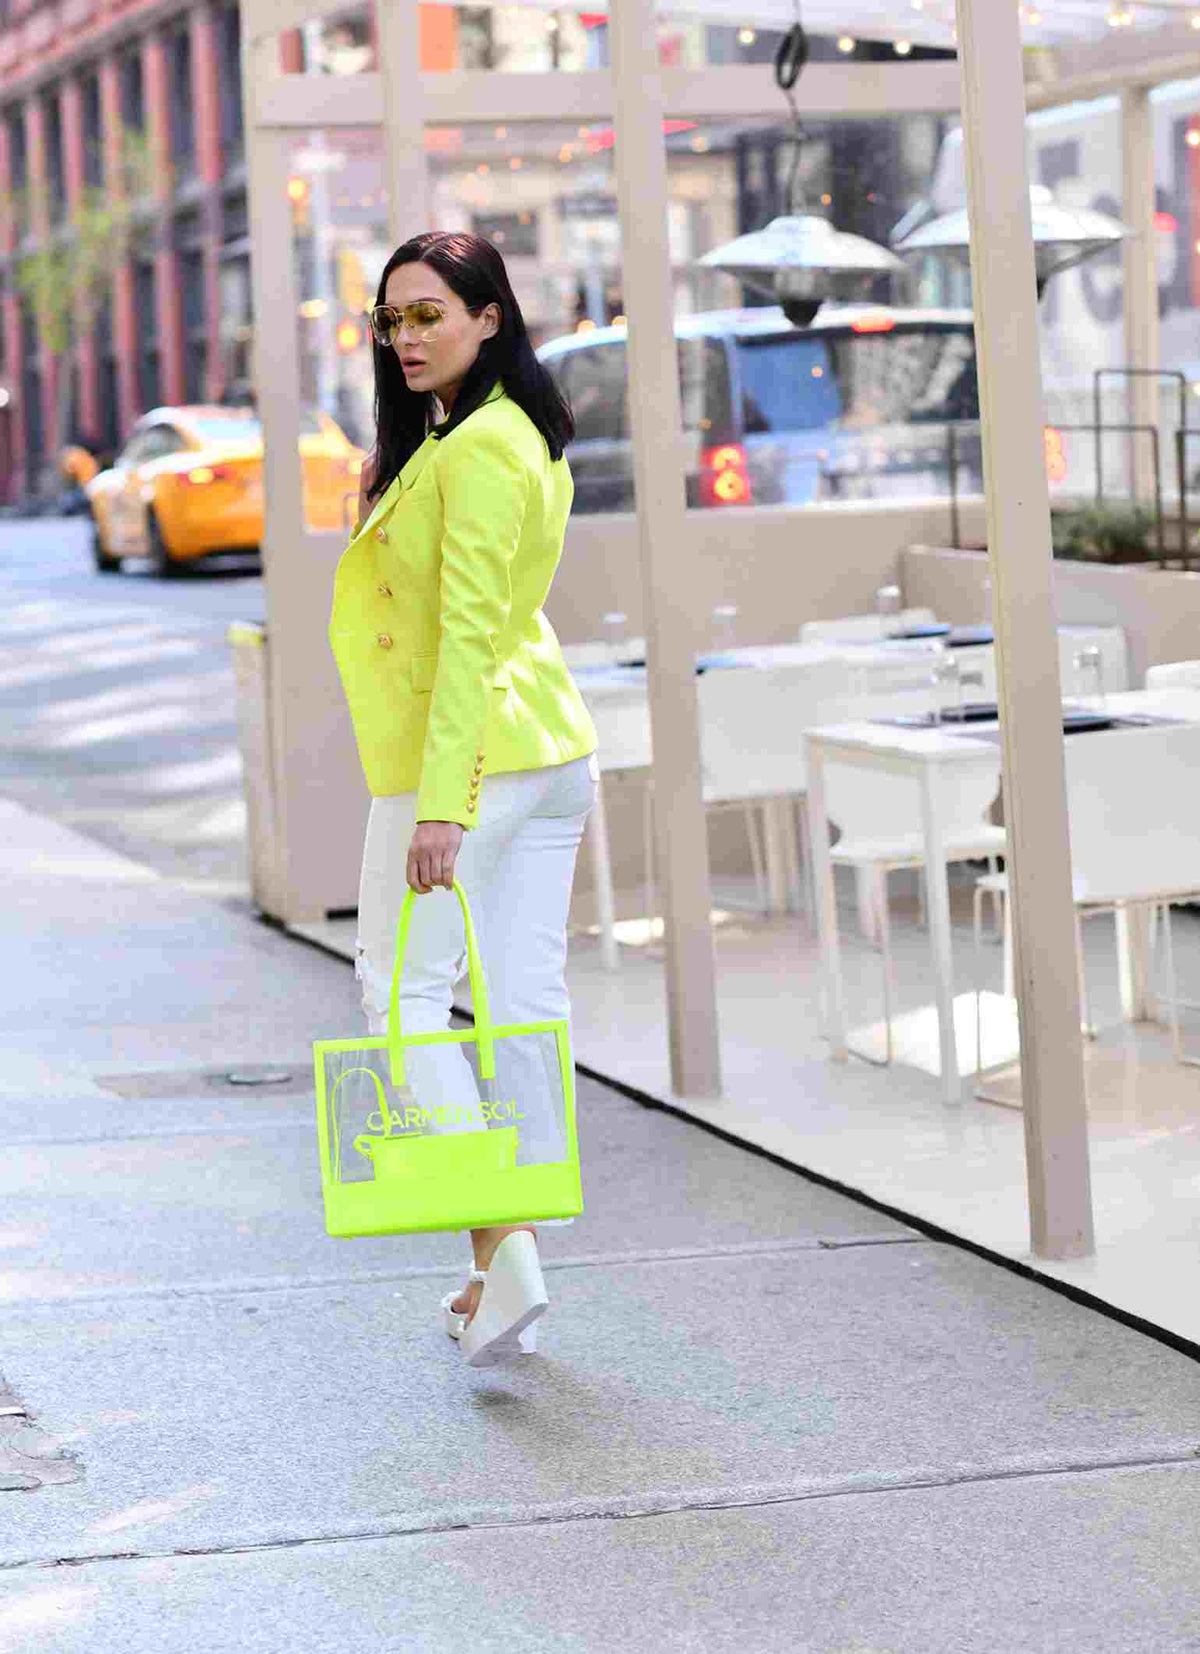 Carmen Sol clear jelly purse in color neon yellow paired with jelly wedges